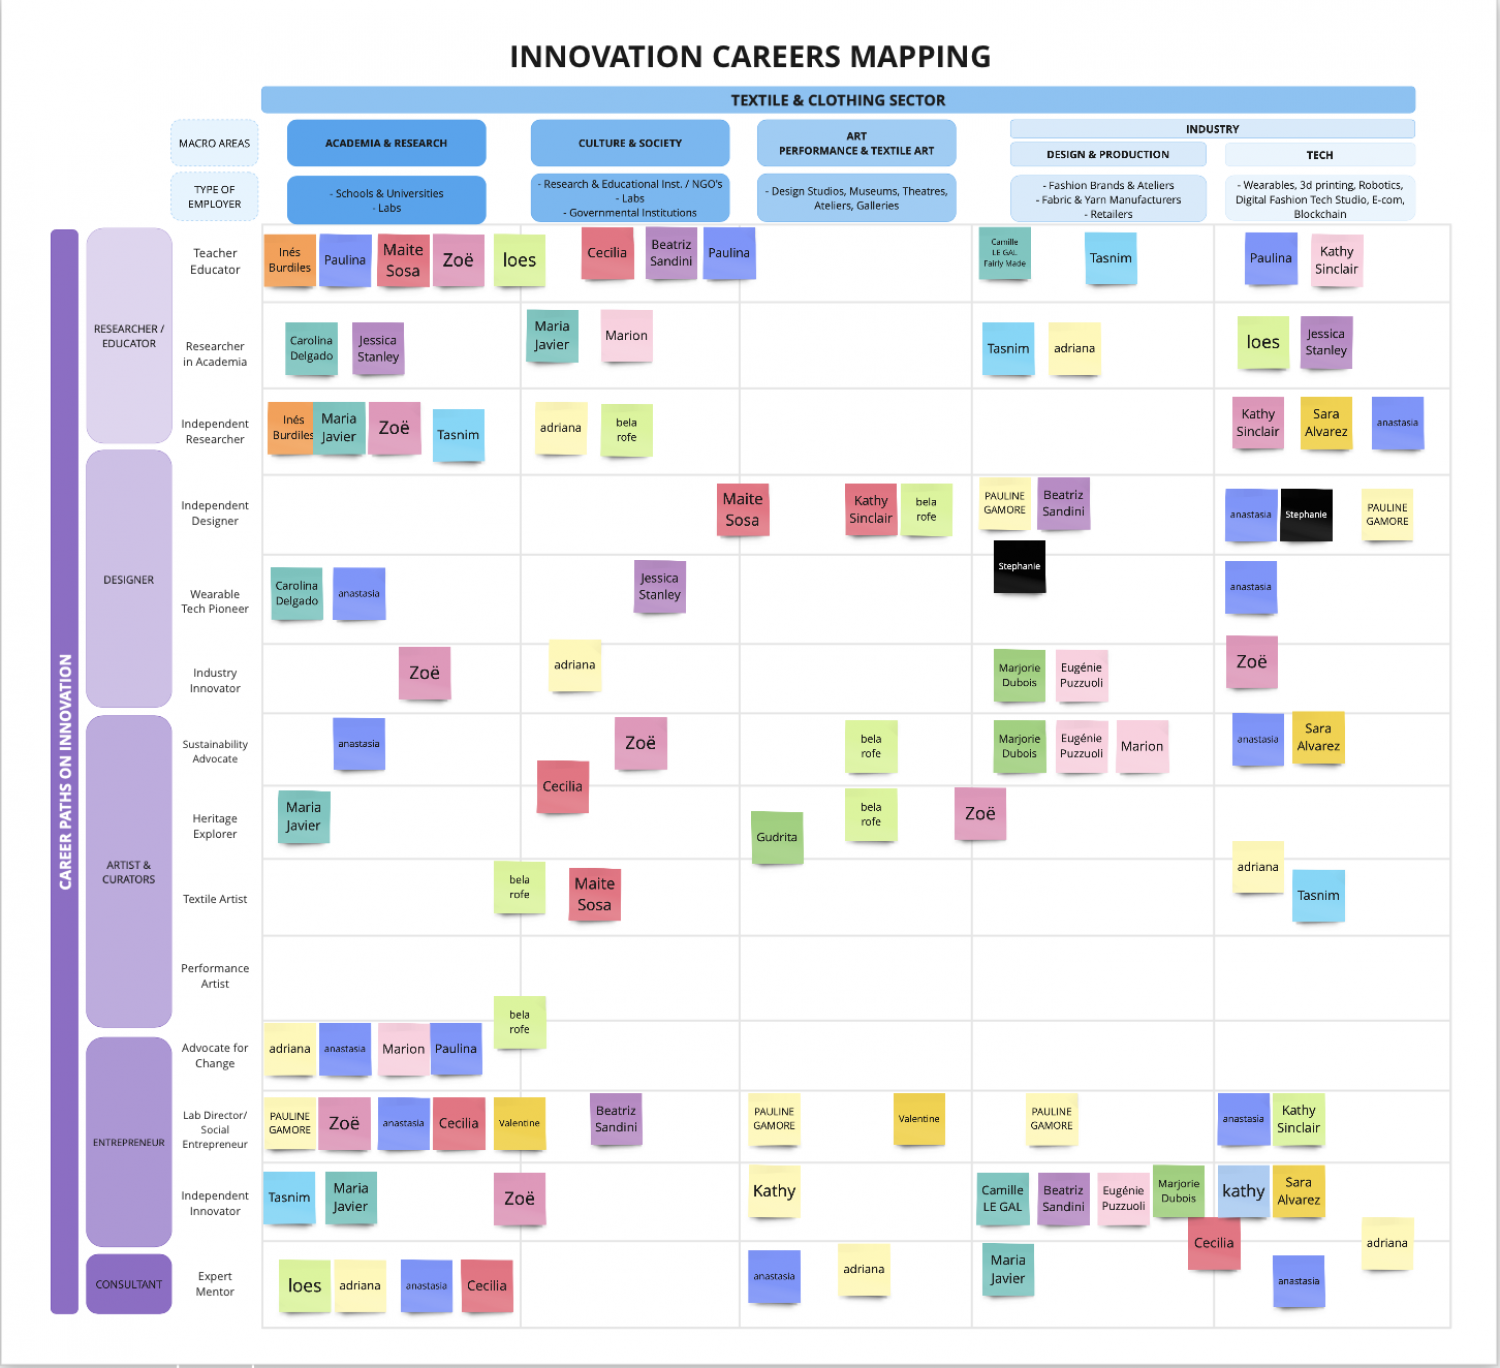 The first career mapping in Shemakes